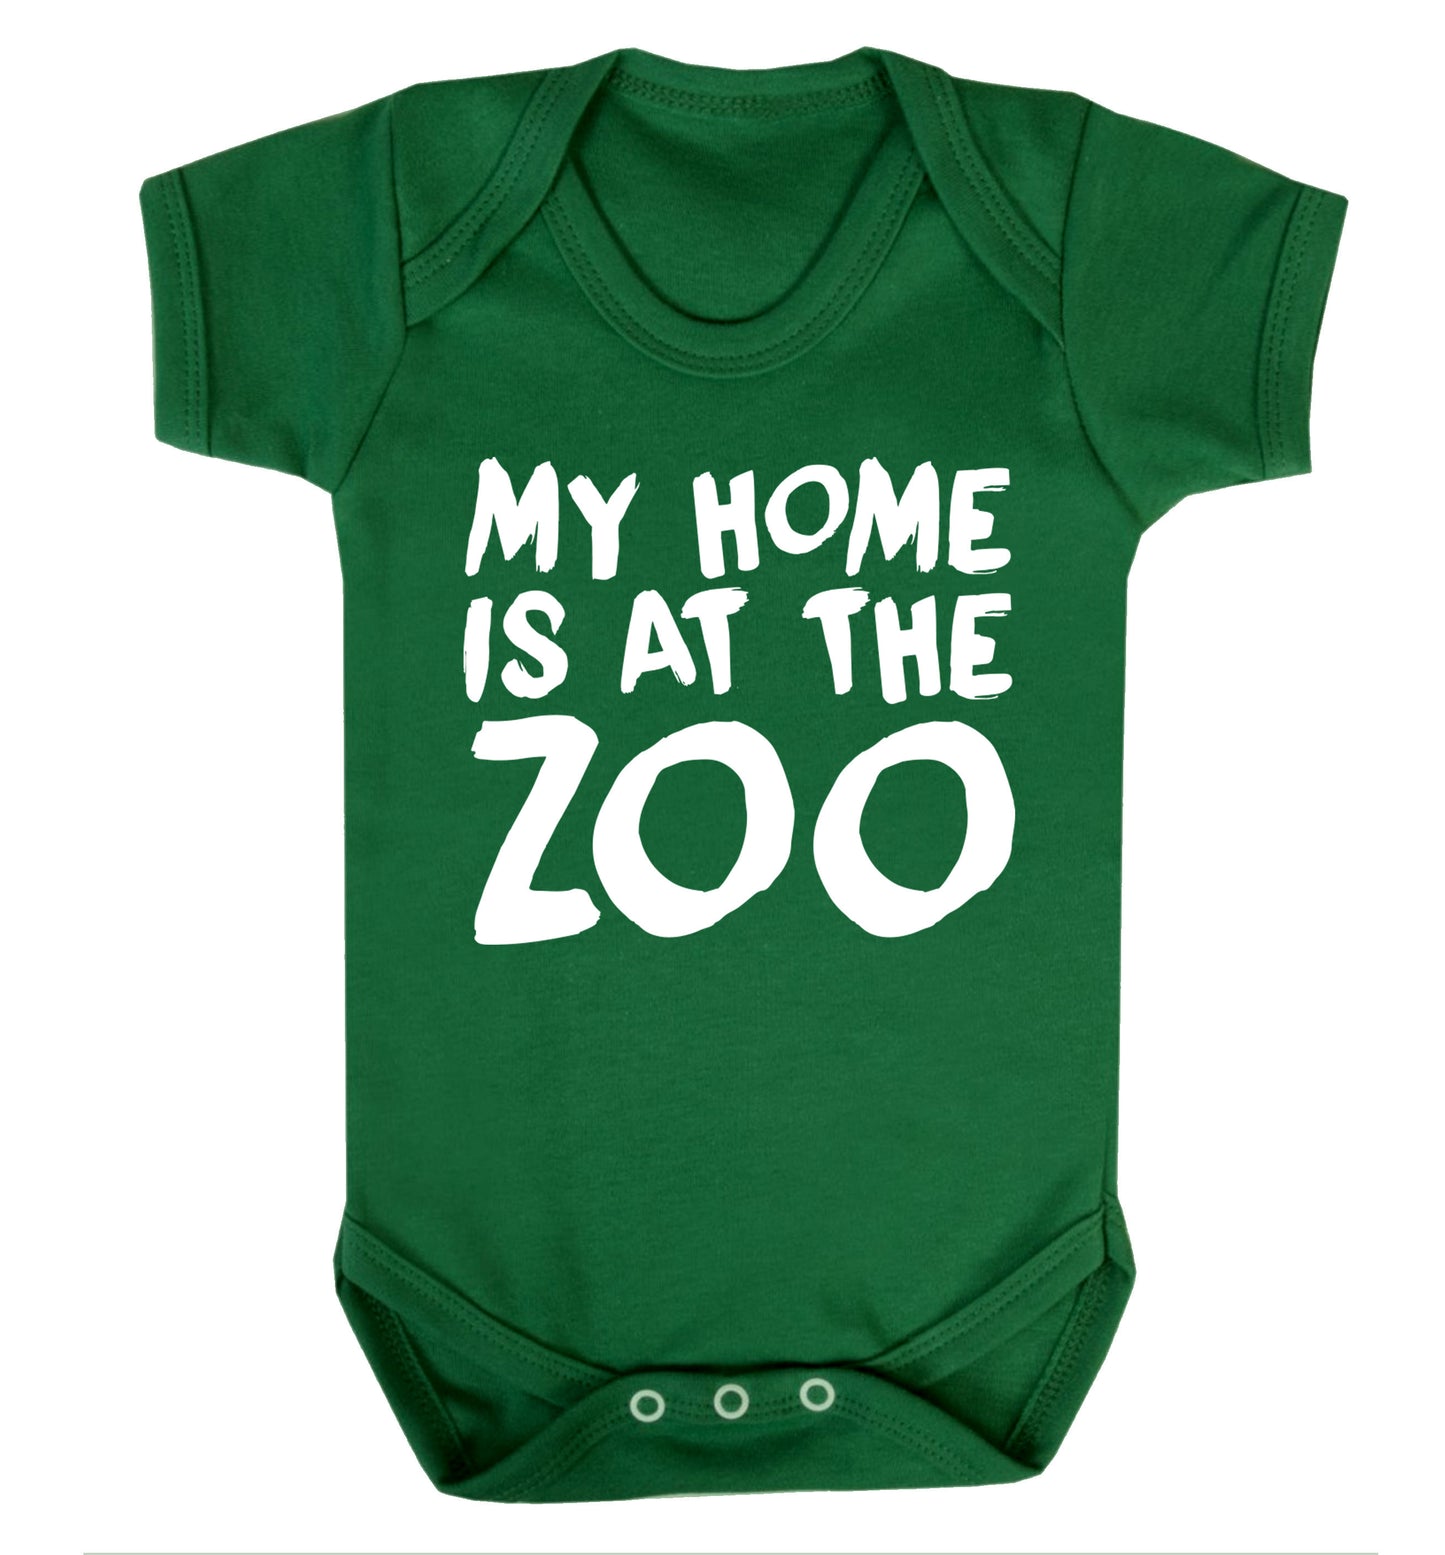 My home is at the zoo Baby Vest green 18-24 months